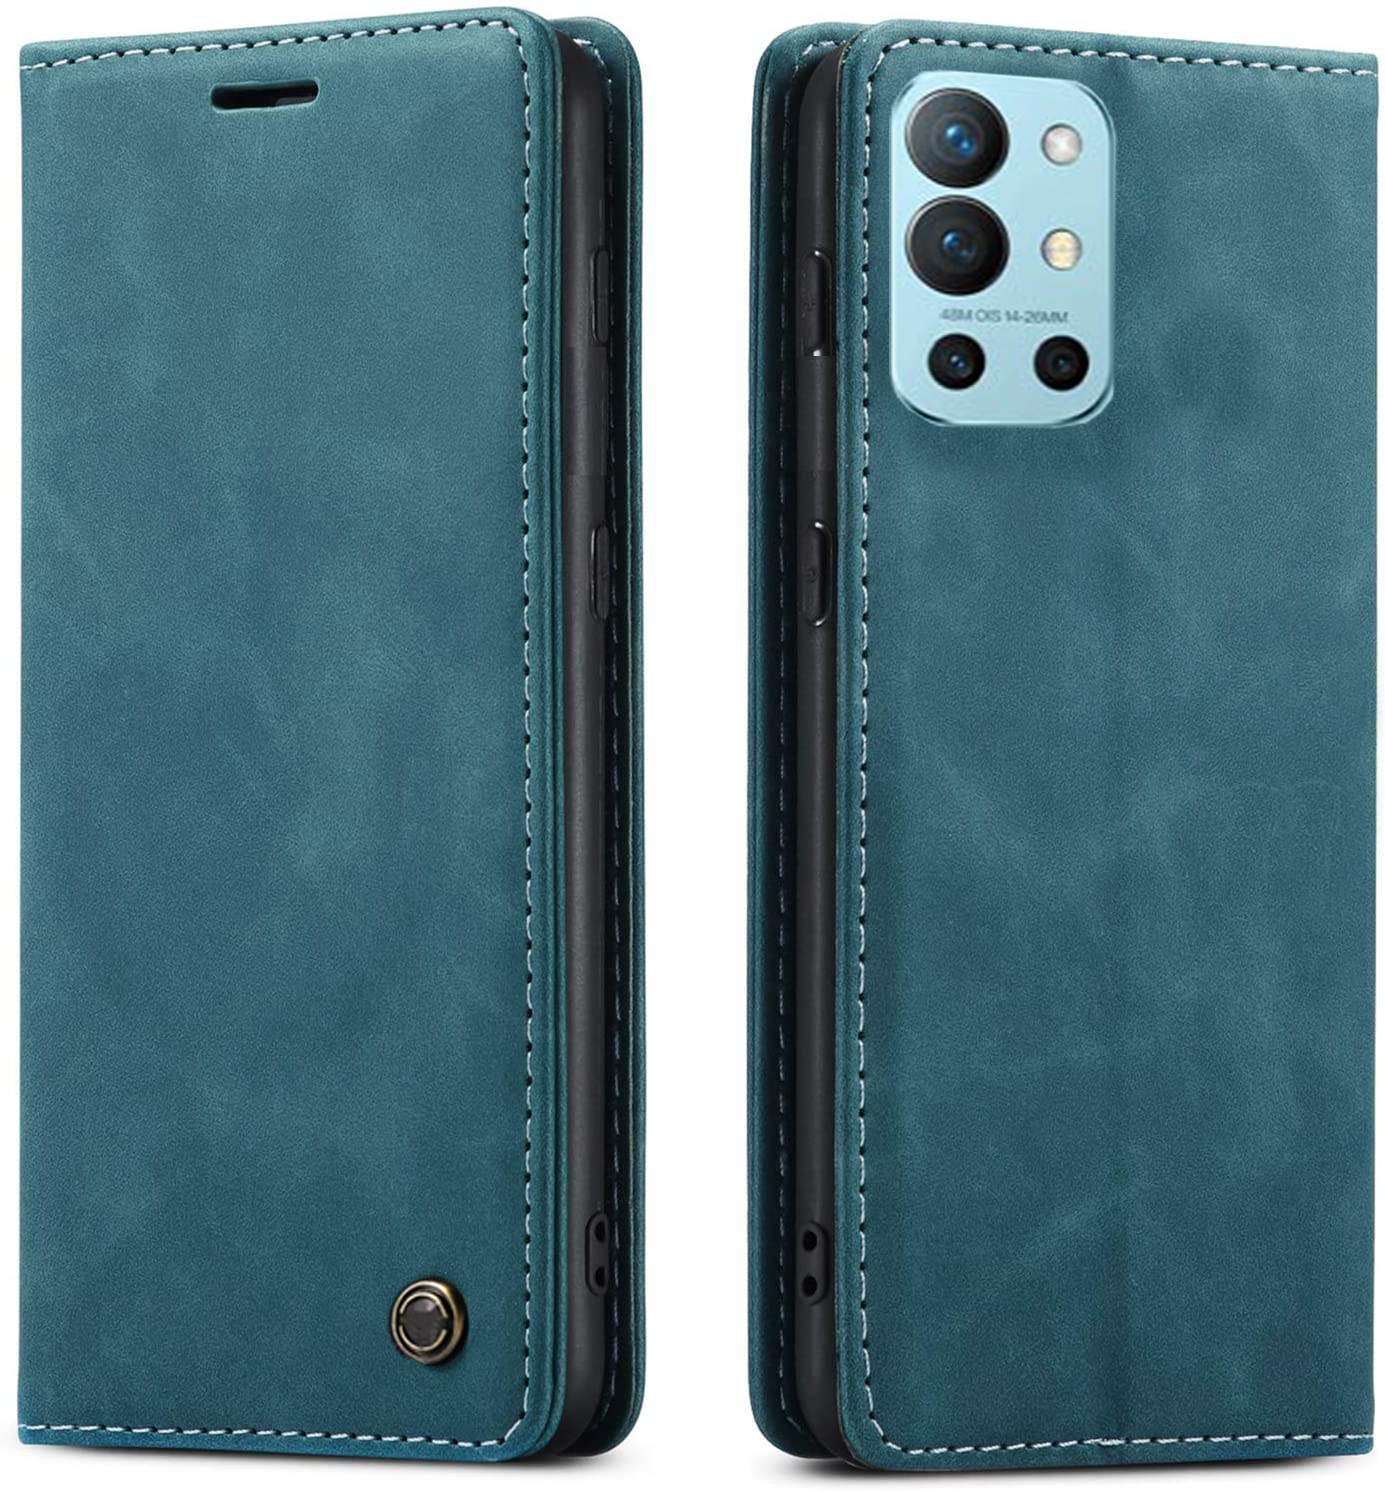 Oneplus 9R blue color leather wallet flip cover case By excelsior